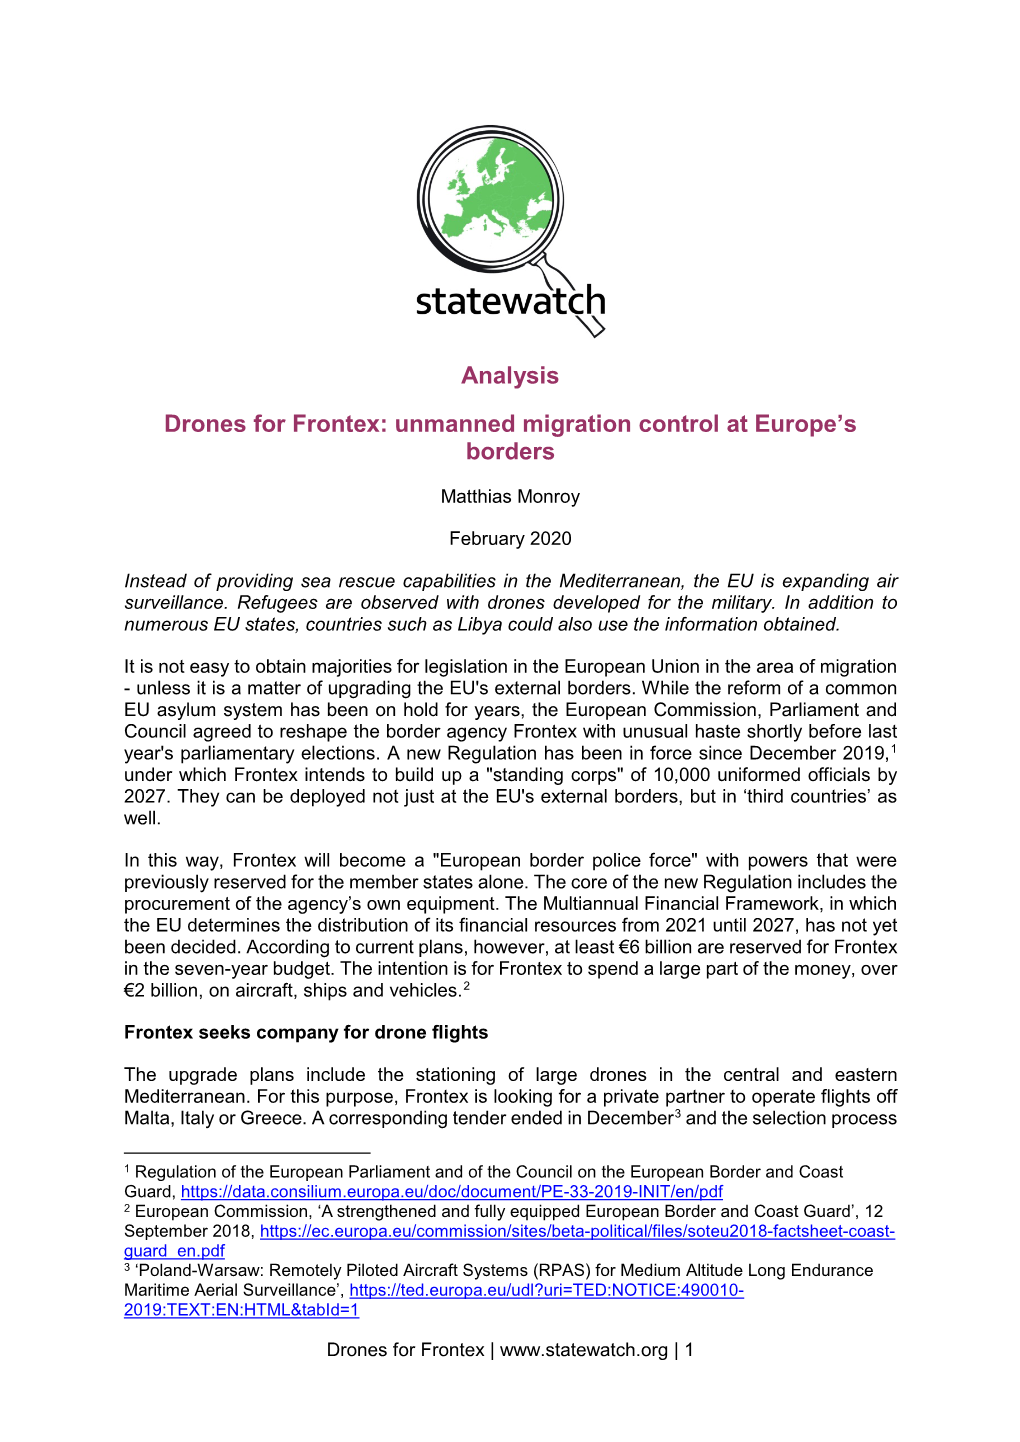 Drones for Frontex: Unmanned Migration Control at Europe's Borders